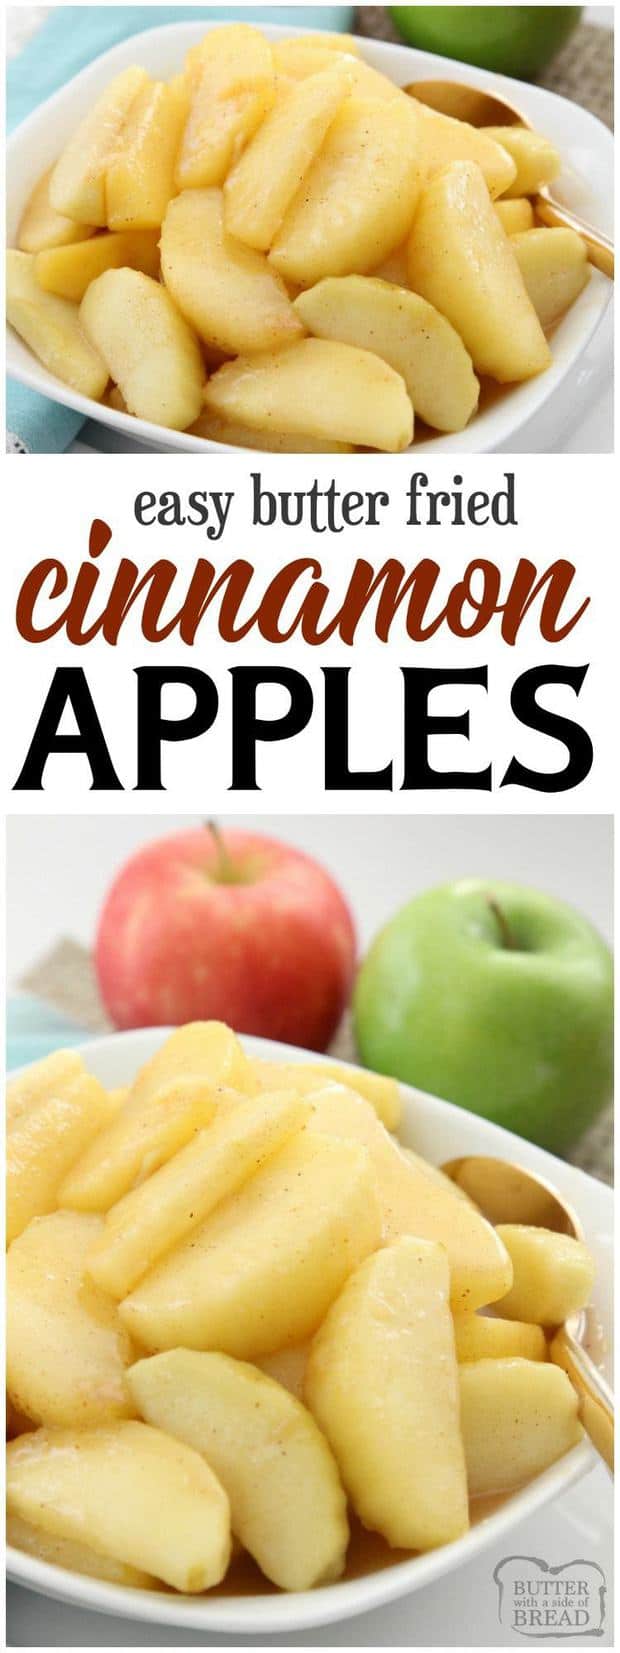 Cinnamon Apples recipe that’s simple to make & spiced with cinnamon & nutmeg. Fried with butter & brown sugar, they taste incredible with dinner or dessert!